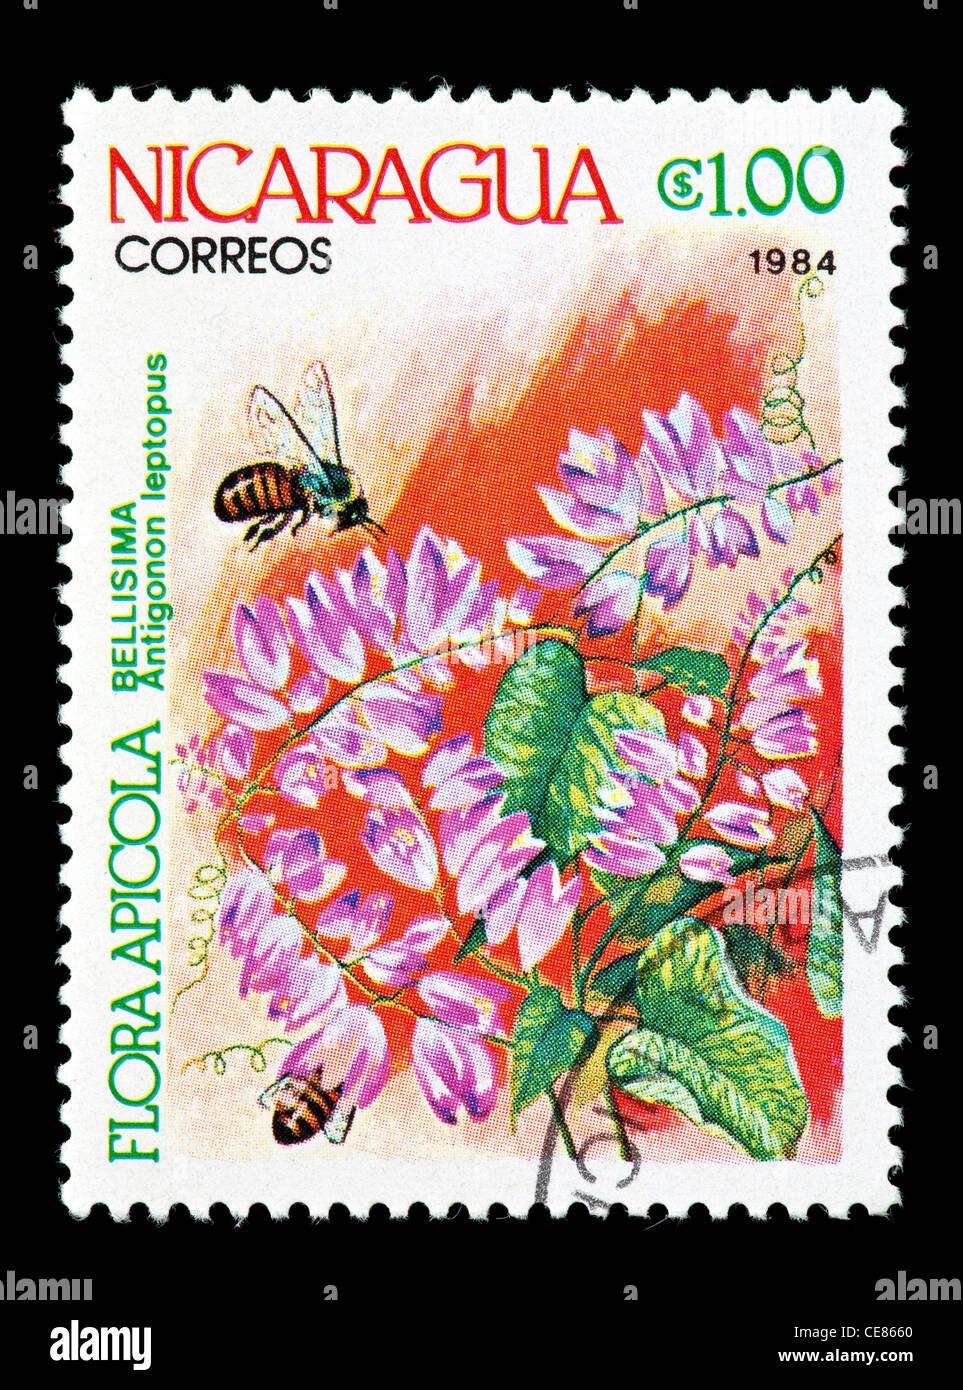 Postage stamp from Nicaragua depicting bees pollinating coral vine (Antigonon leptopus) Stock Photo